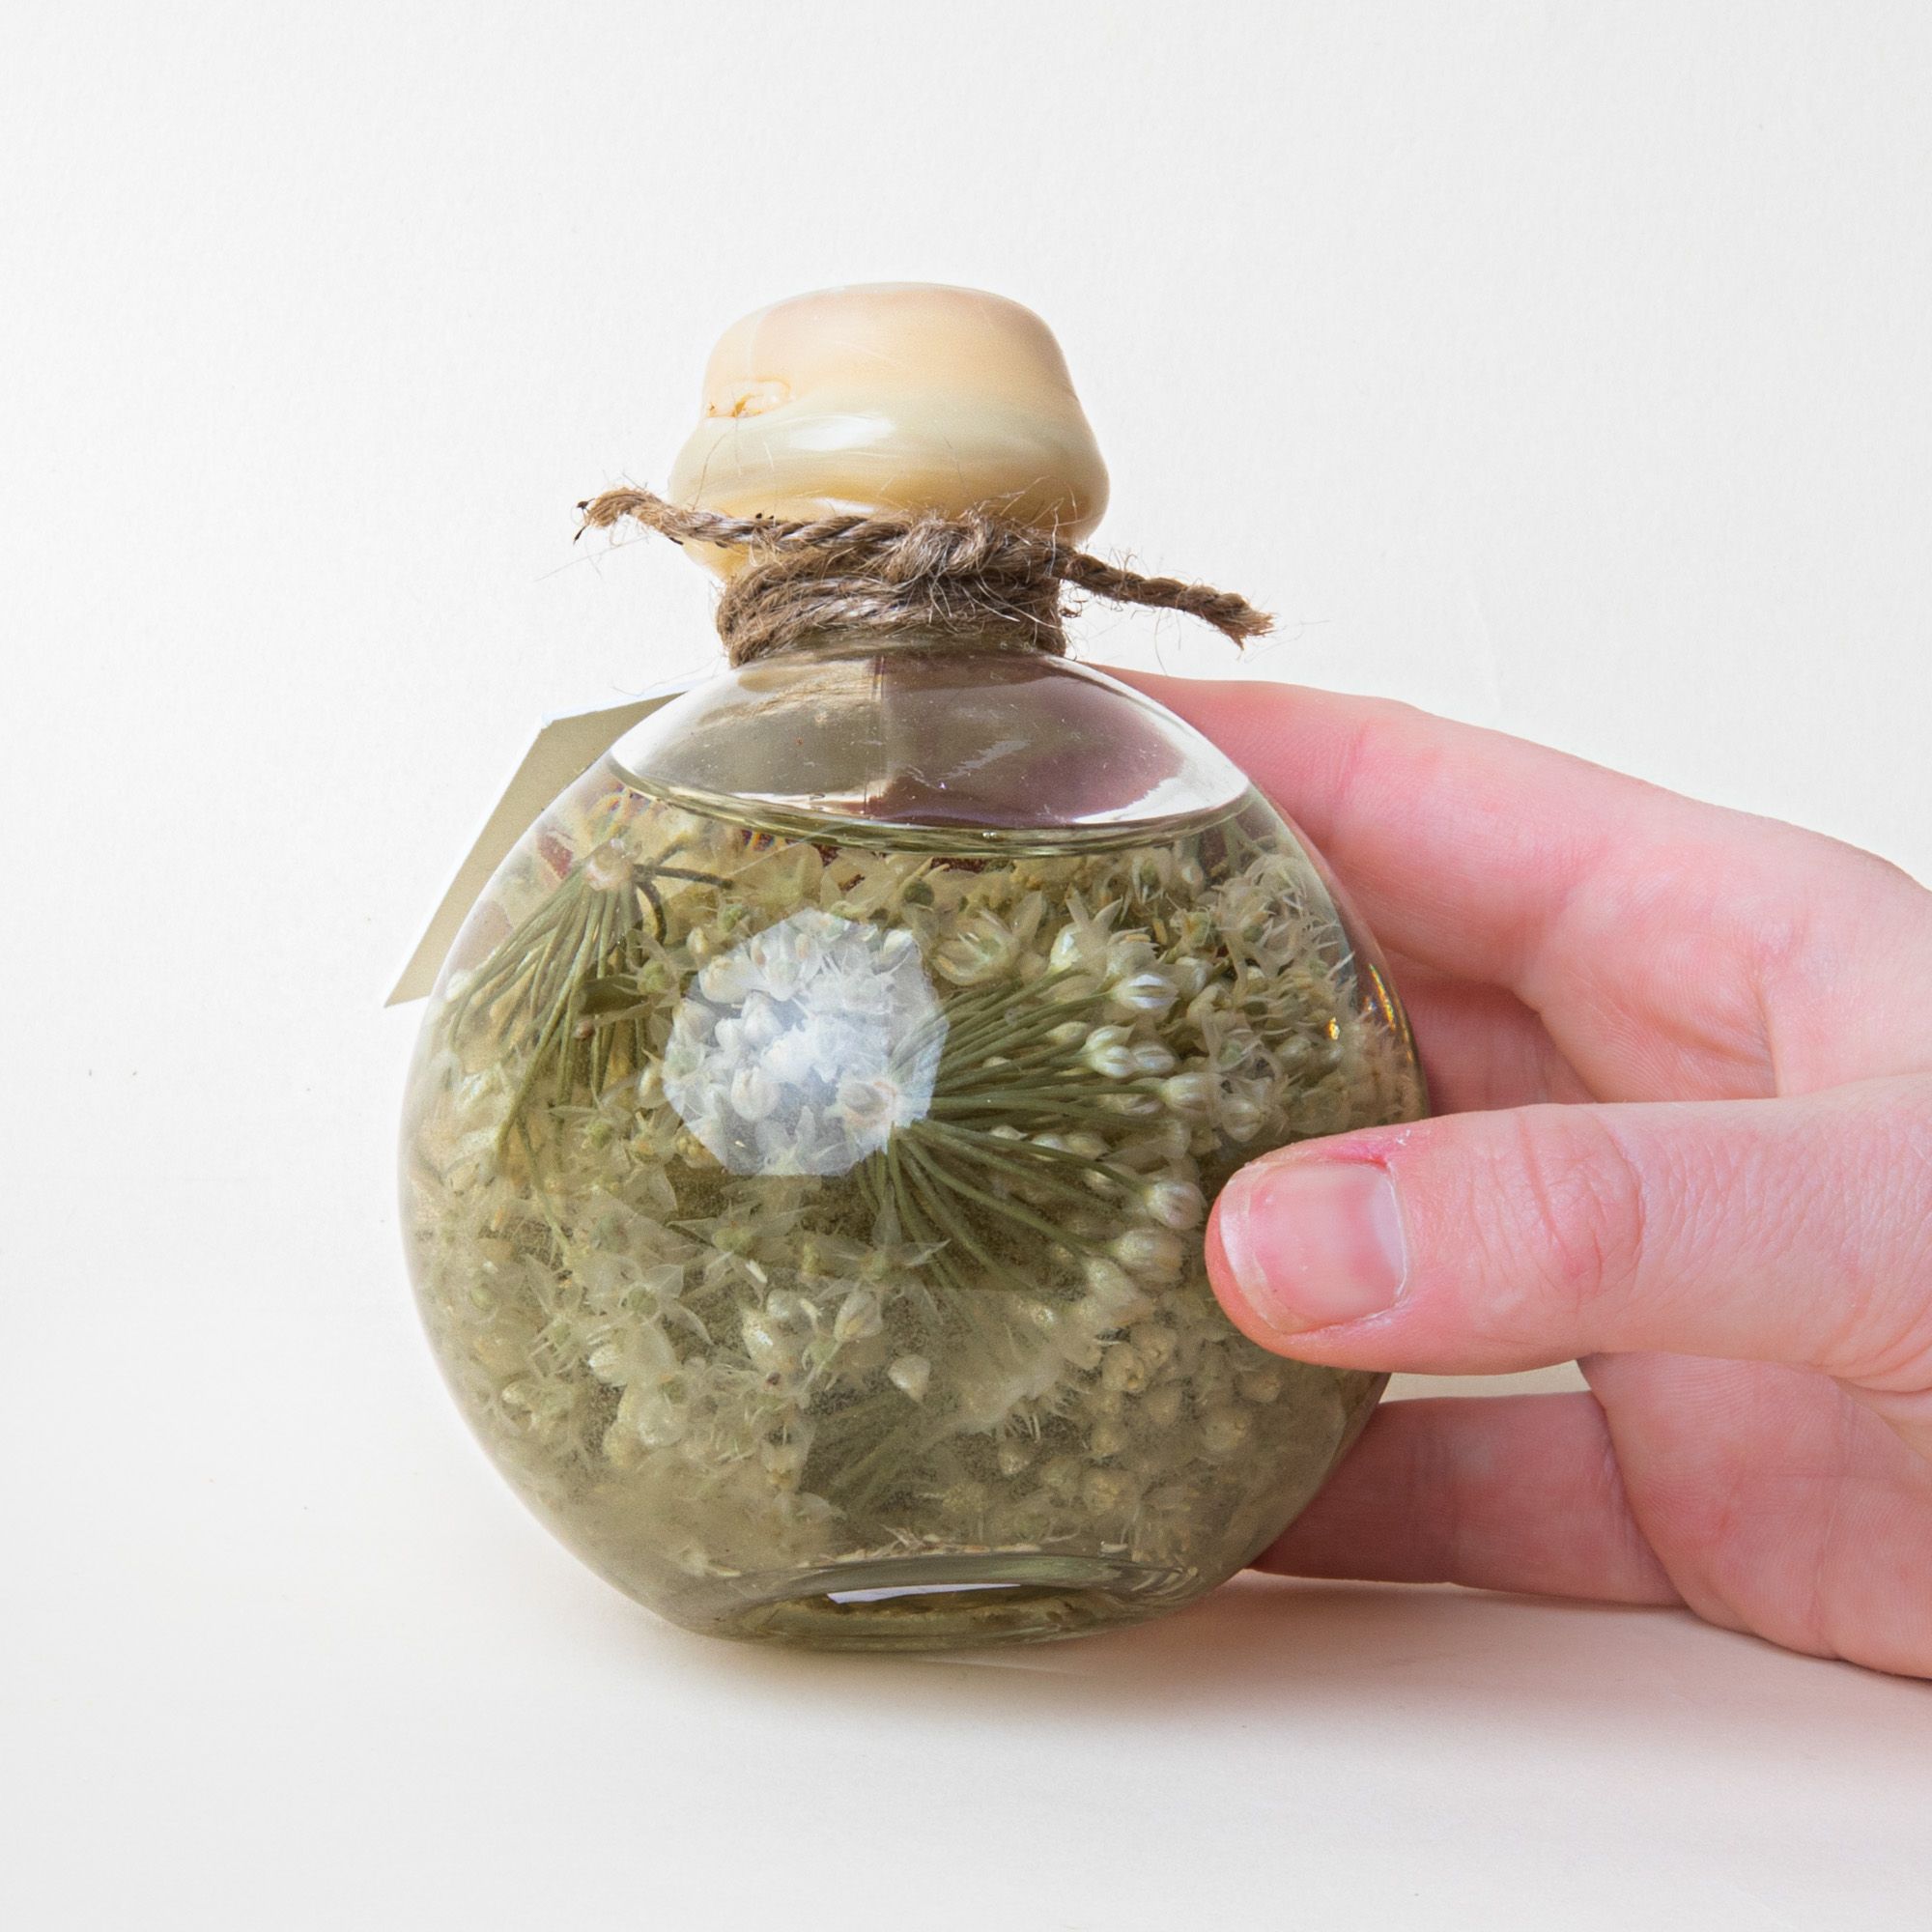 A hand holding a round jar filled with flowery liquid in a sage green color with a wooden cap